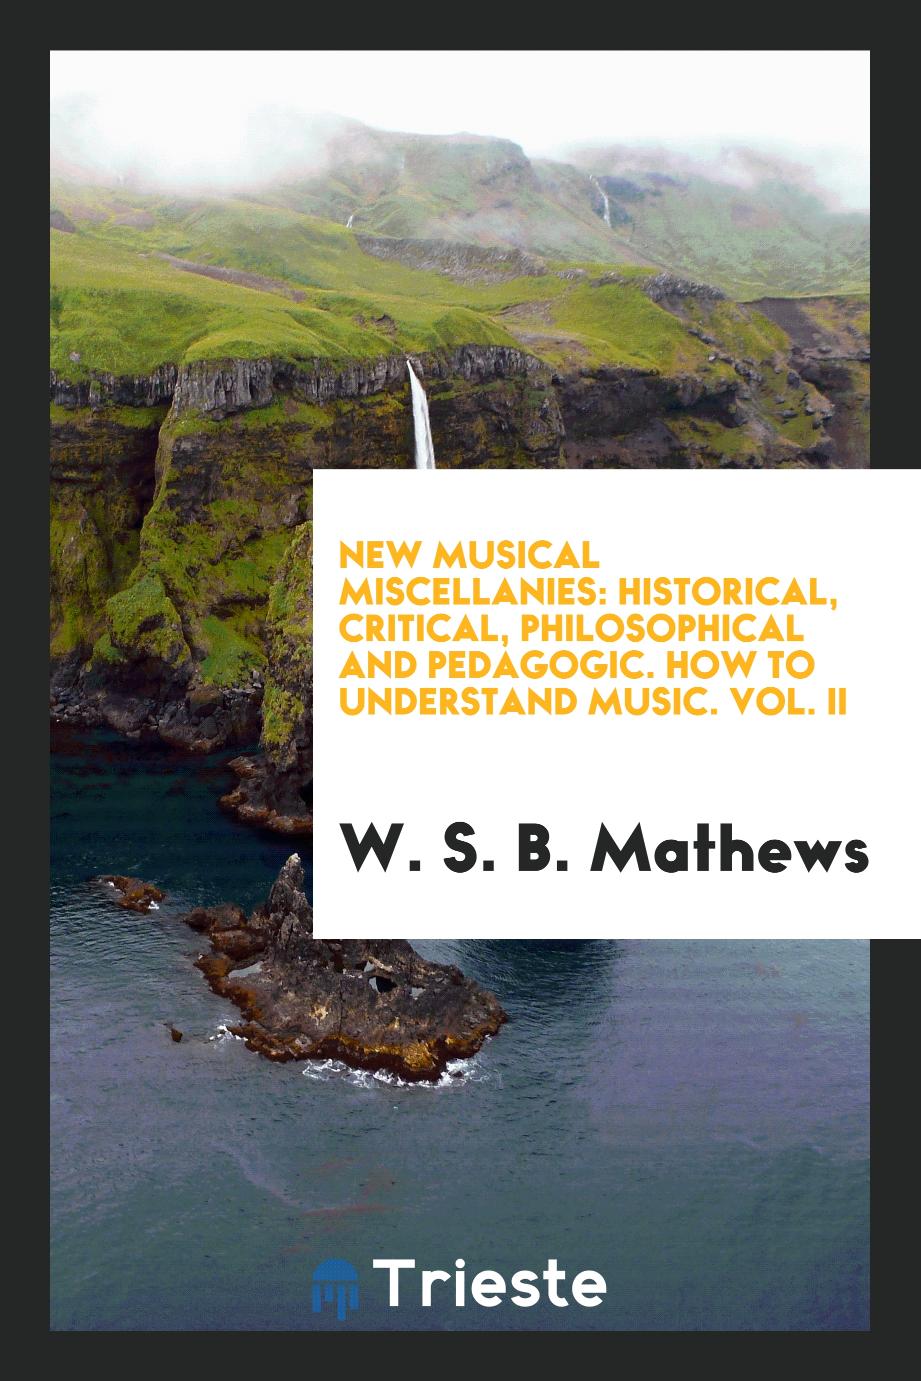 New musical miscellanies: historical, critical, philosophical and pedagogic. How to understand music. Vol. II